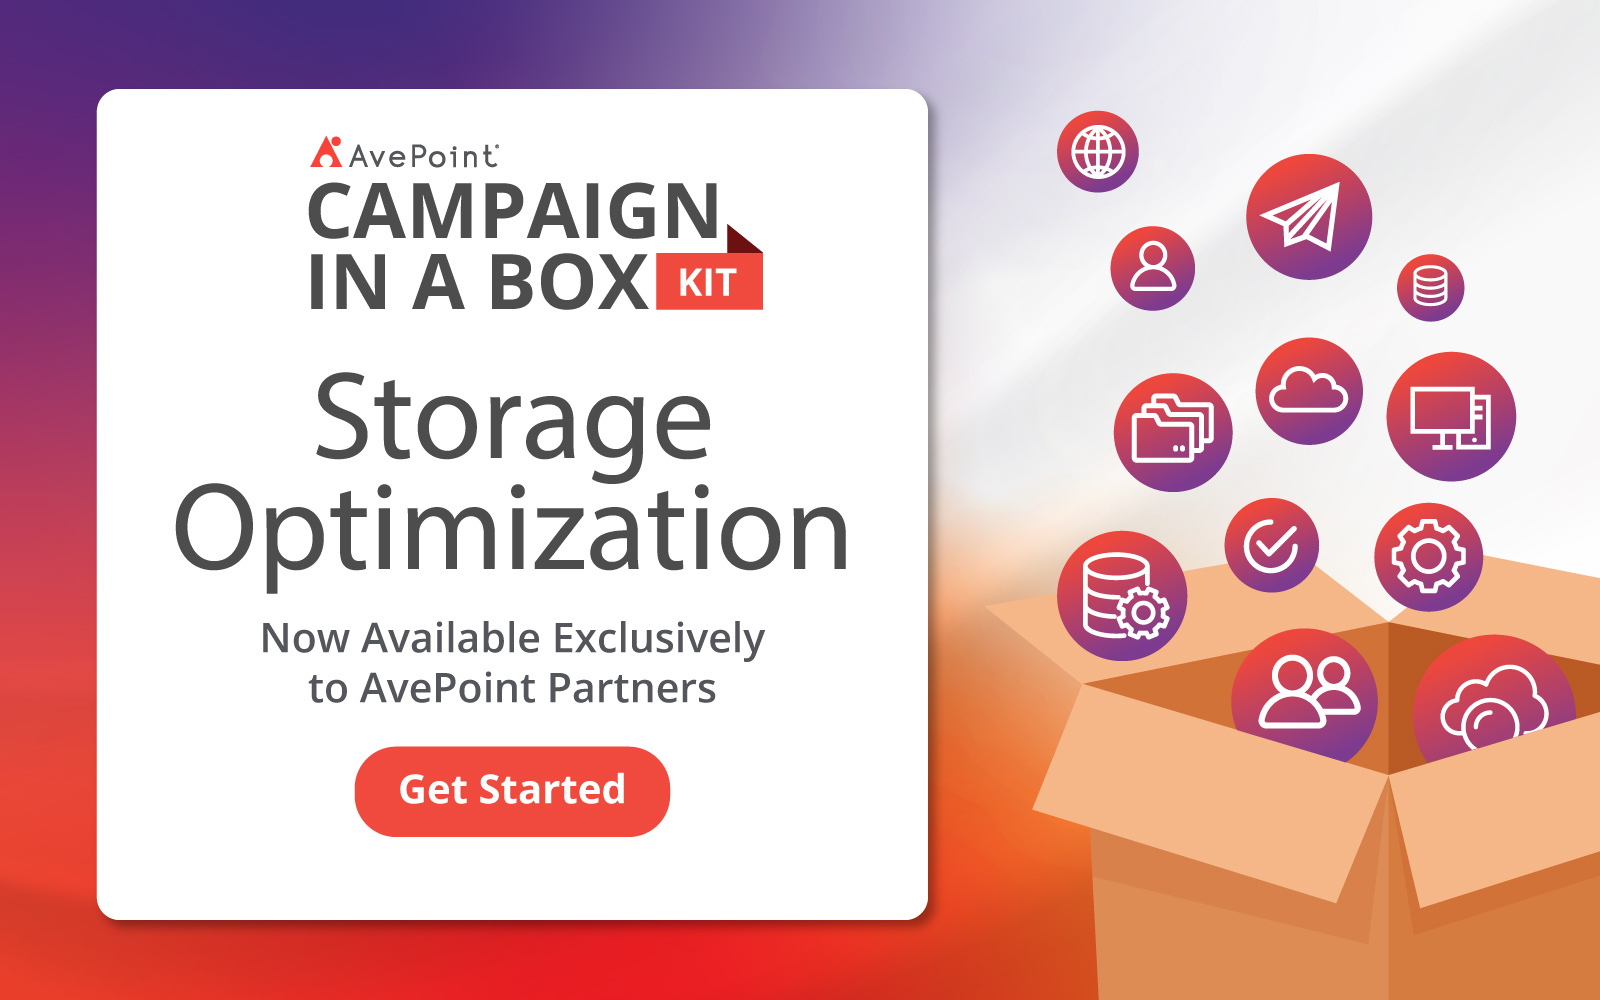 Empowering MSPs with AvePoint’s New Storage Optimization Campaign in a Box Kit